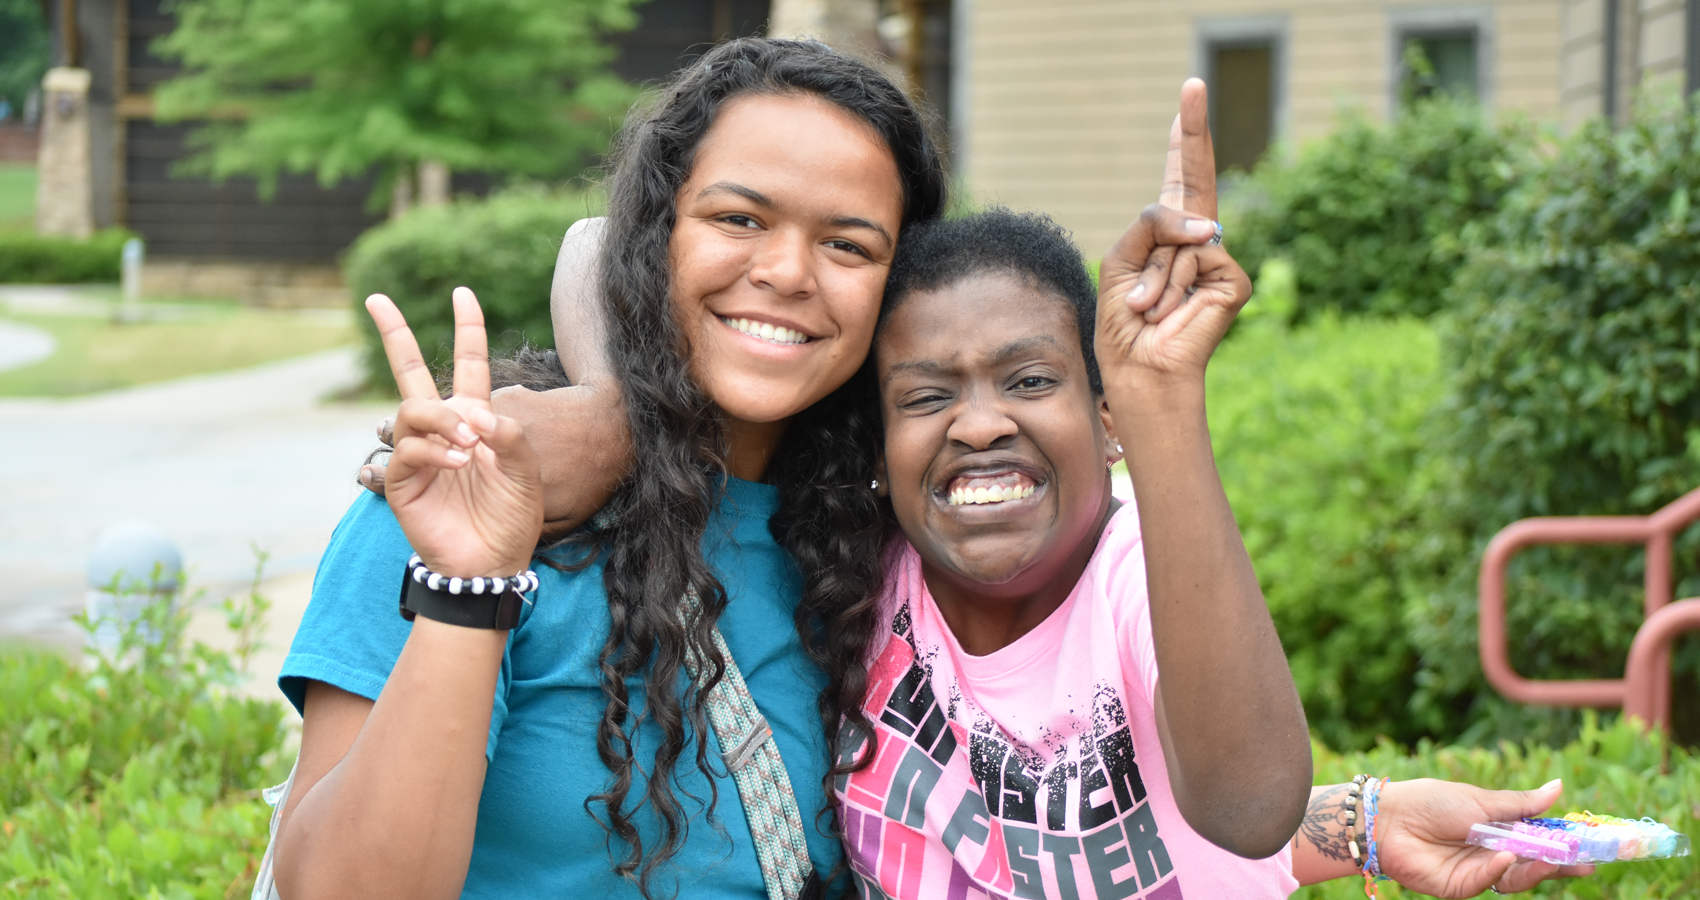 Counselor and camper smiling with peace sign hands